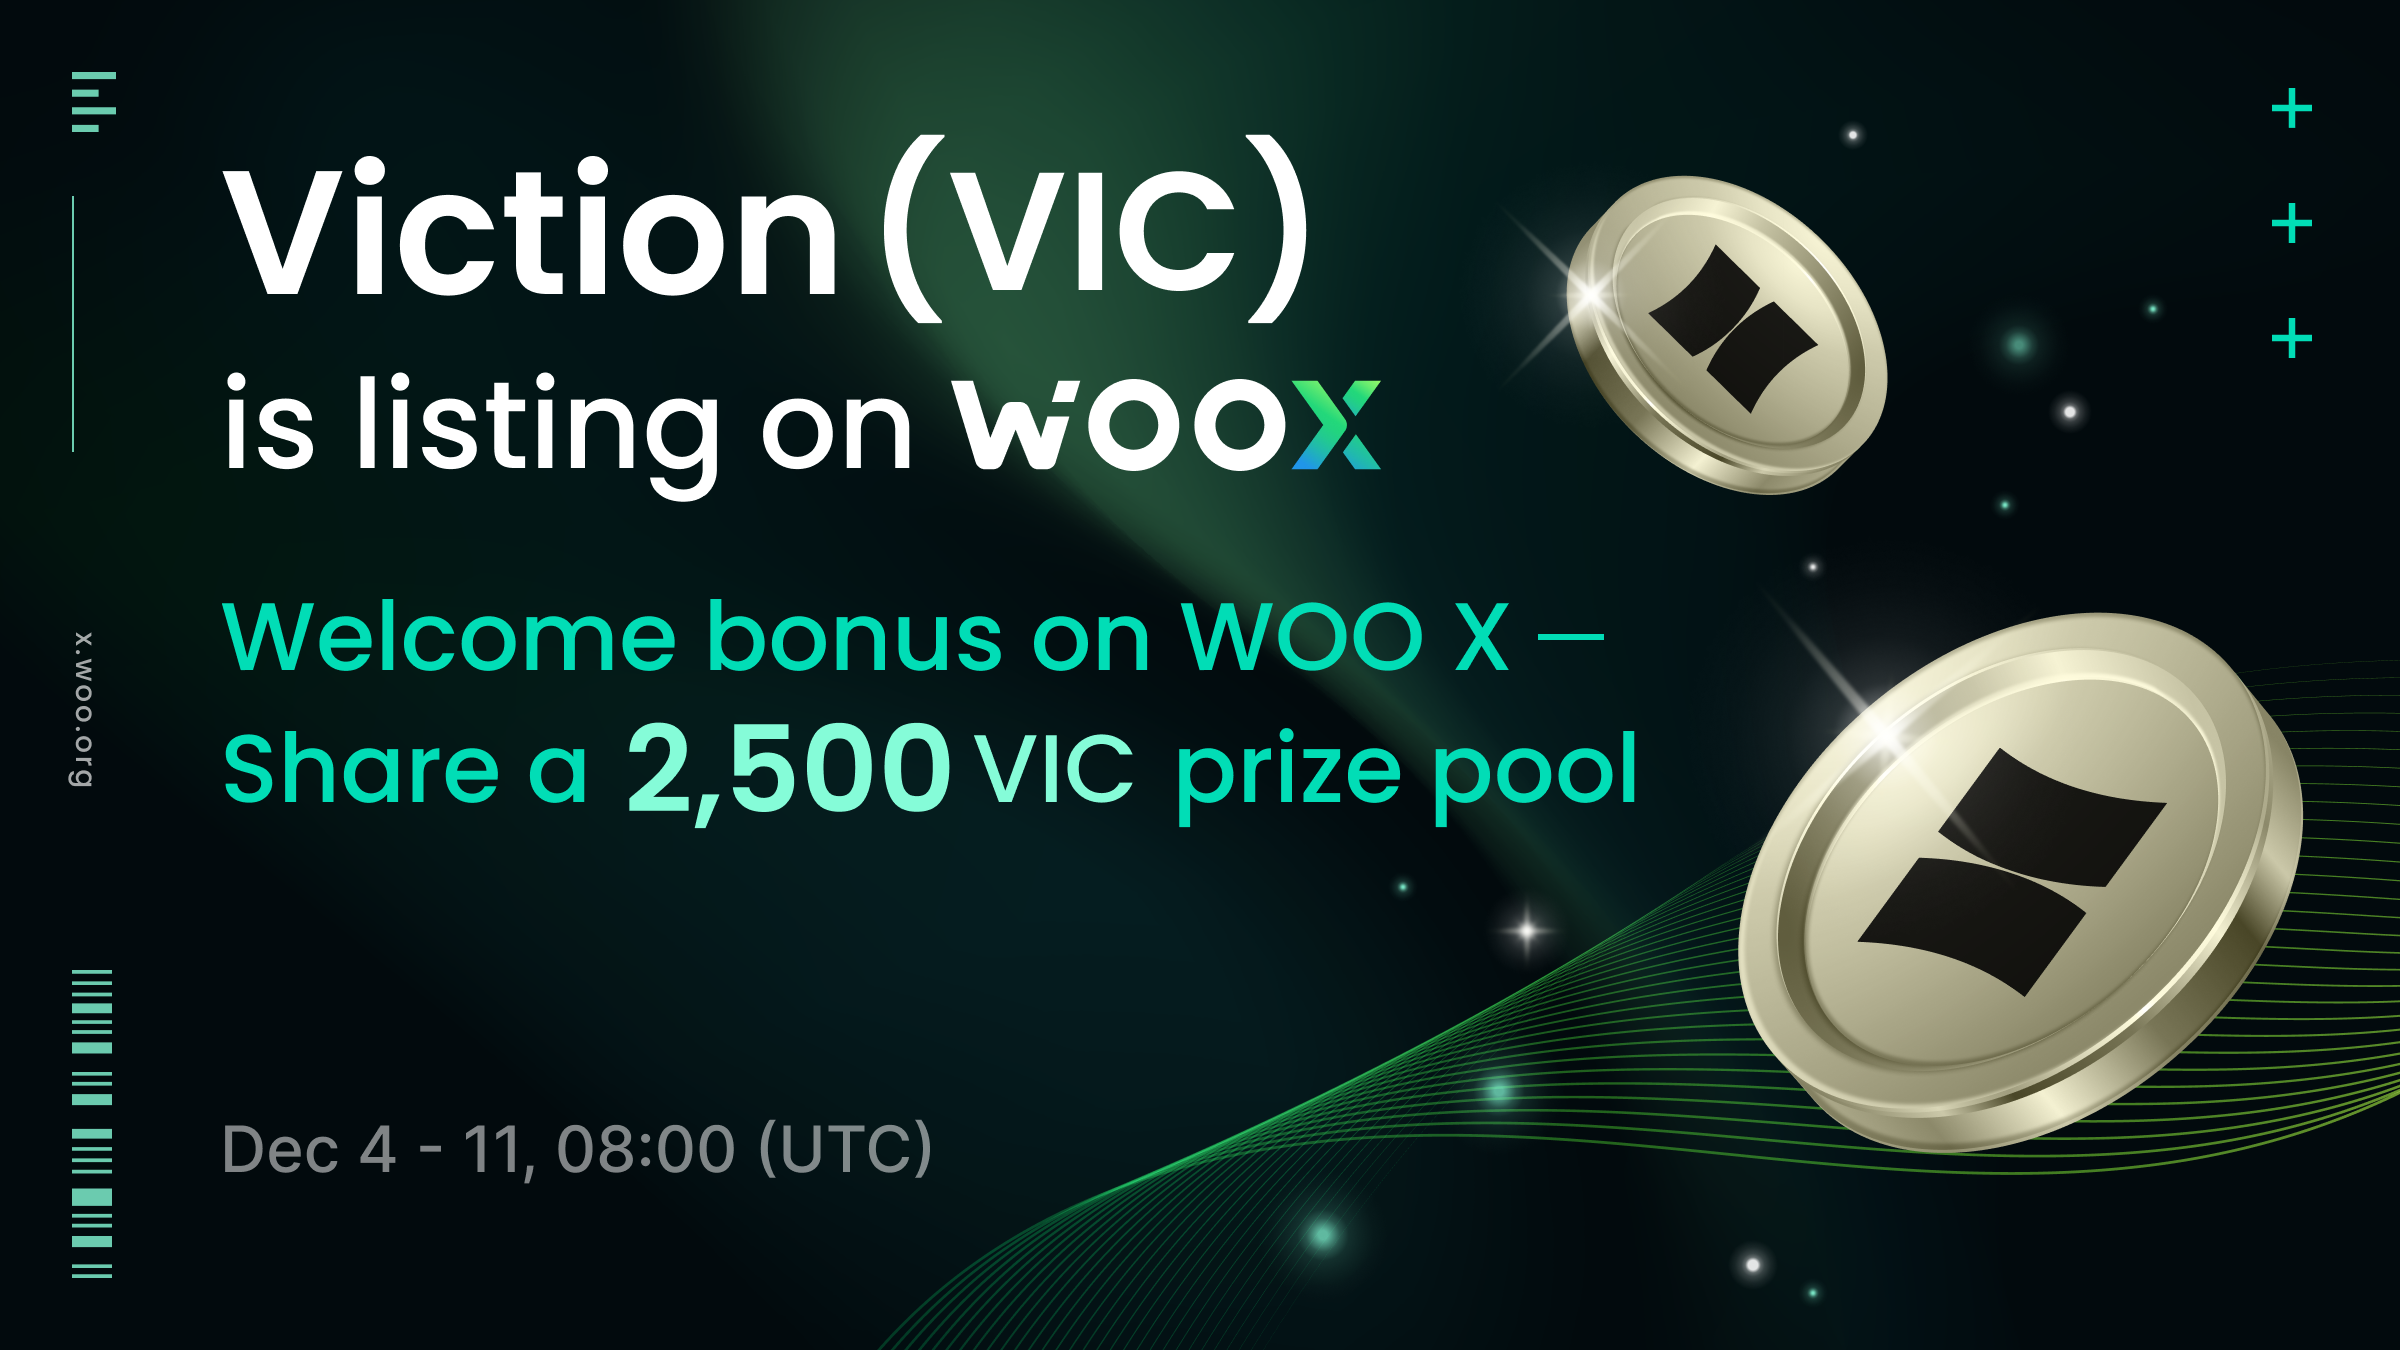 New Listing: Viction (VIC) on WOO X - Share a 2,500 VIC prize pool!